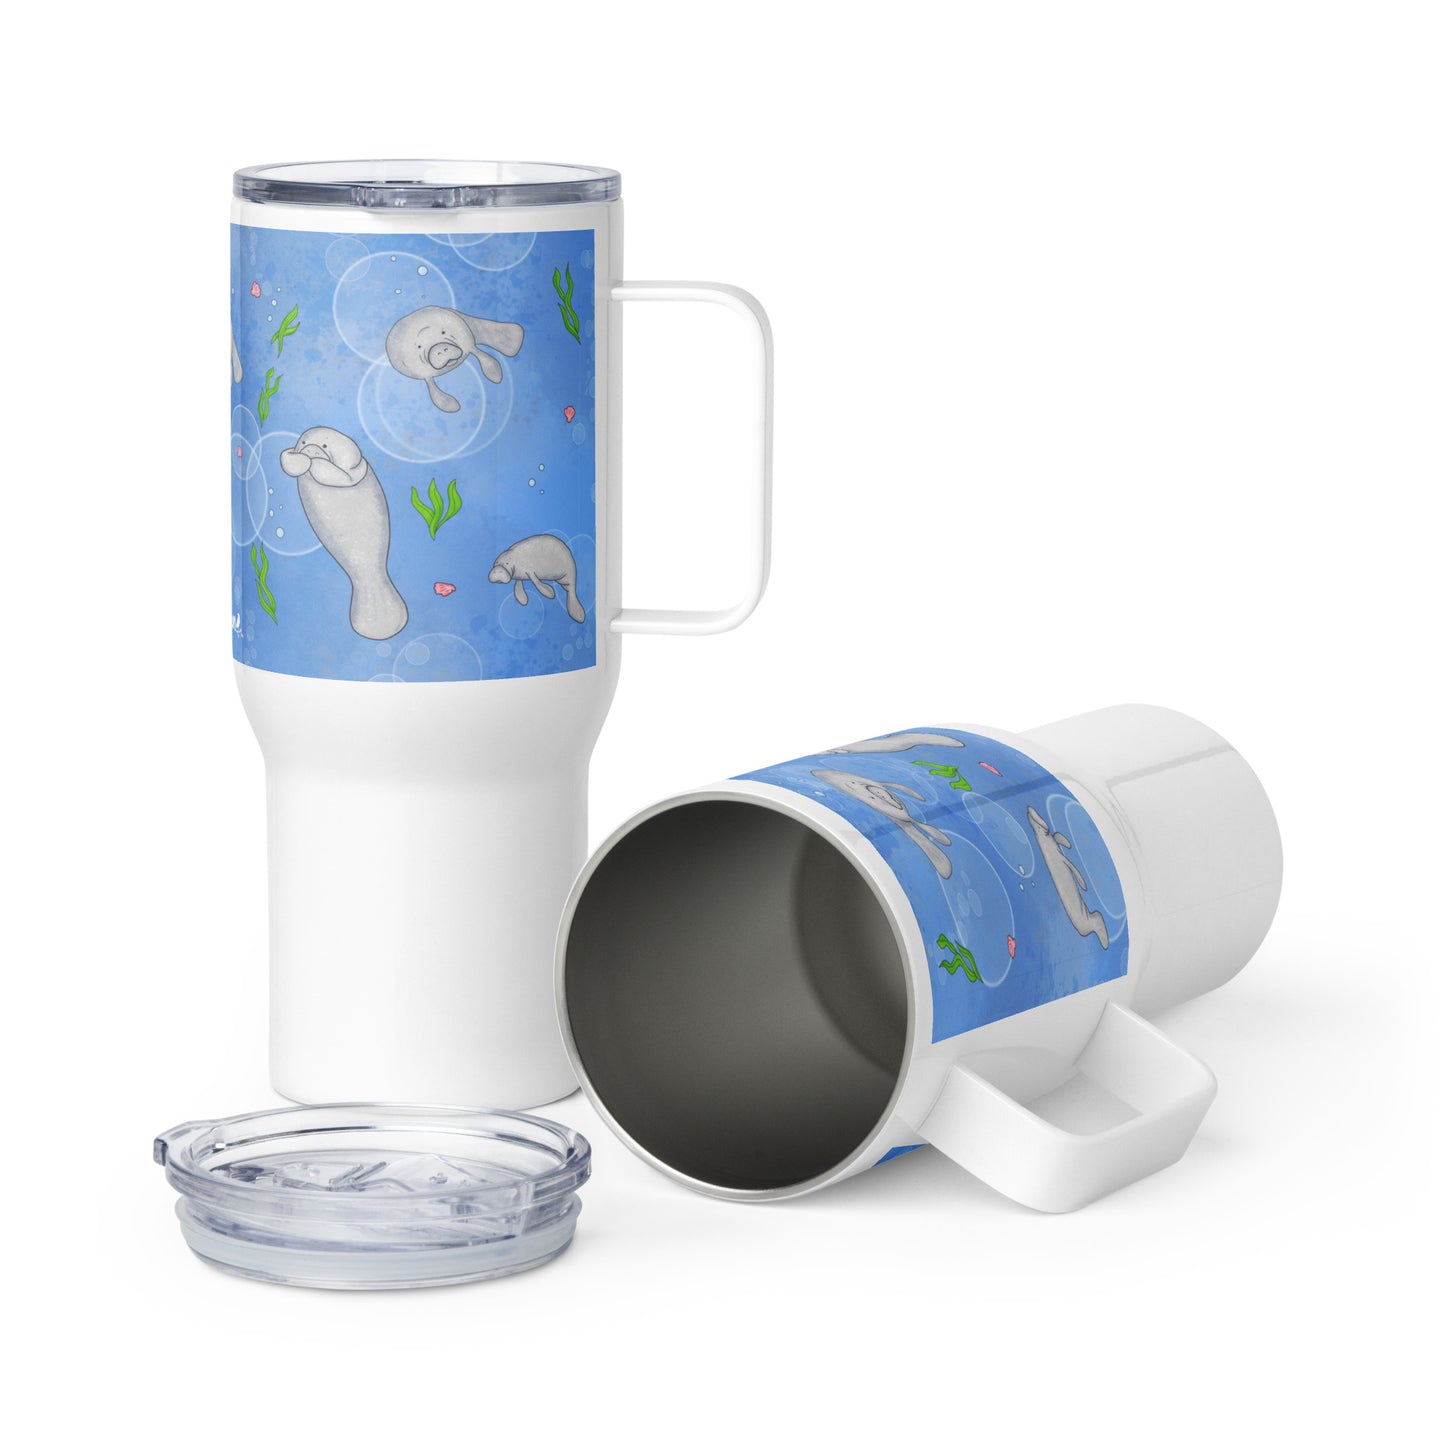 Stainless steel travel mug with handle. Holds 25 ounces of hot or cold drinks. Has wraparound illustrated manatees design. Fits most car cup holders. Comes with spill-proof BPA-free plastic lid.